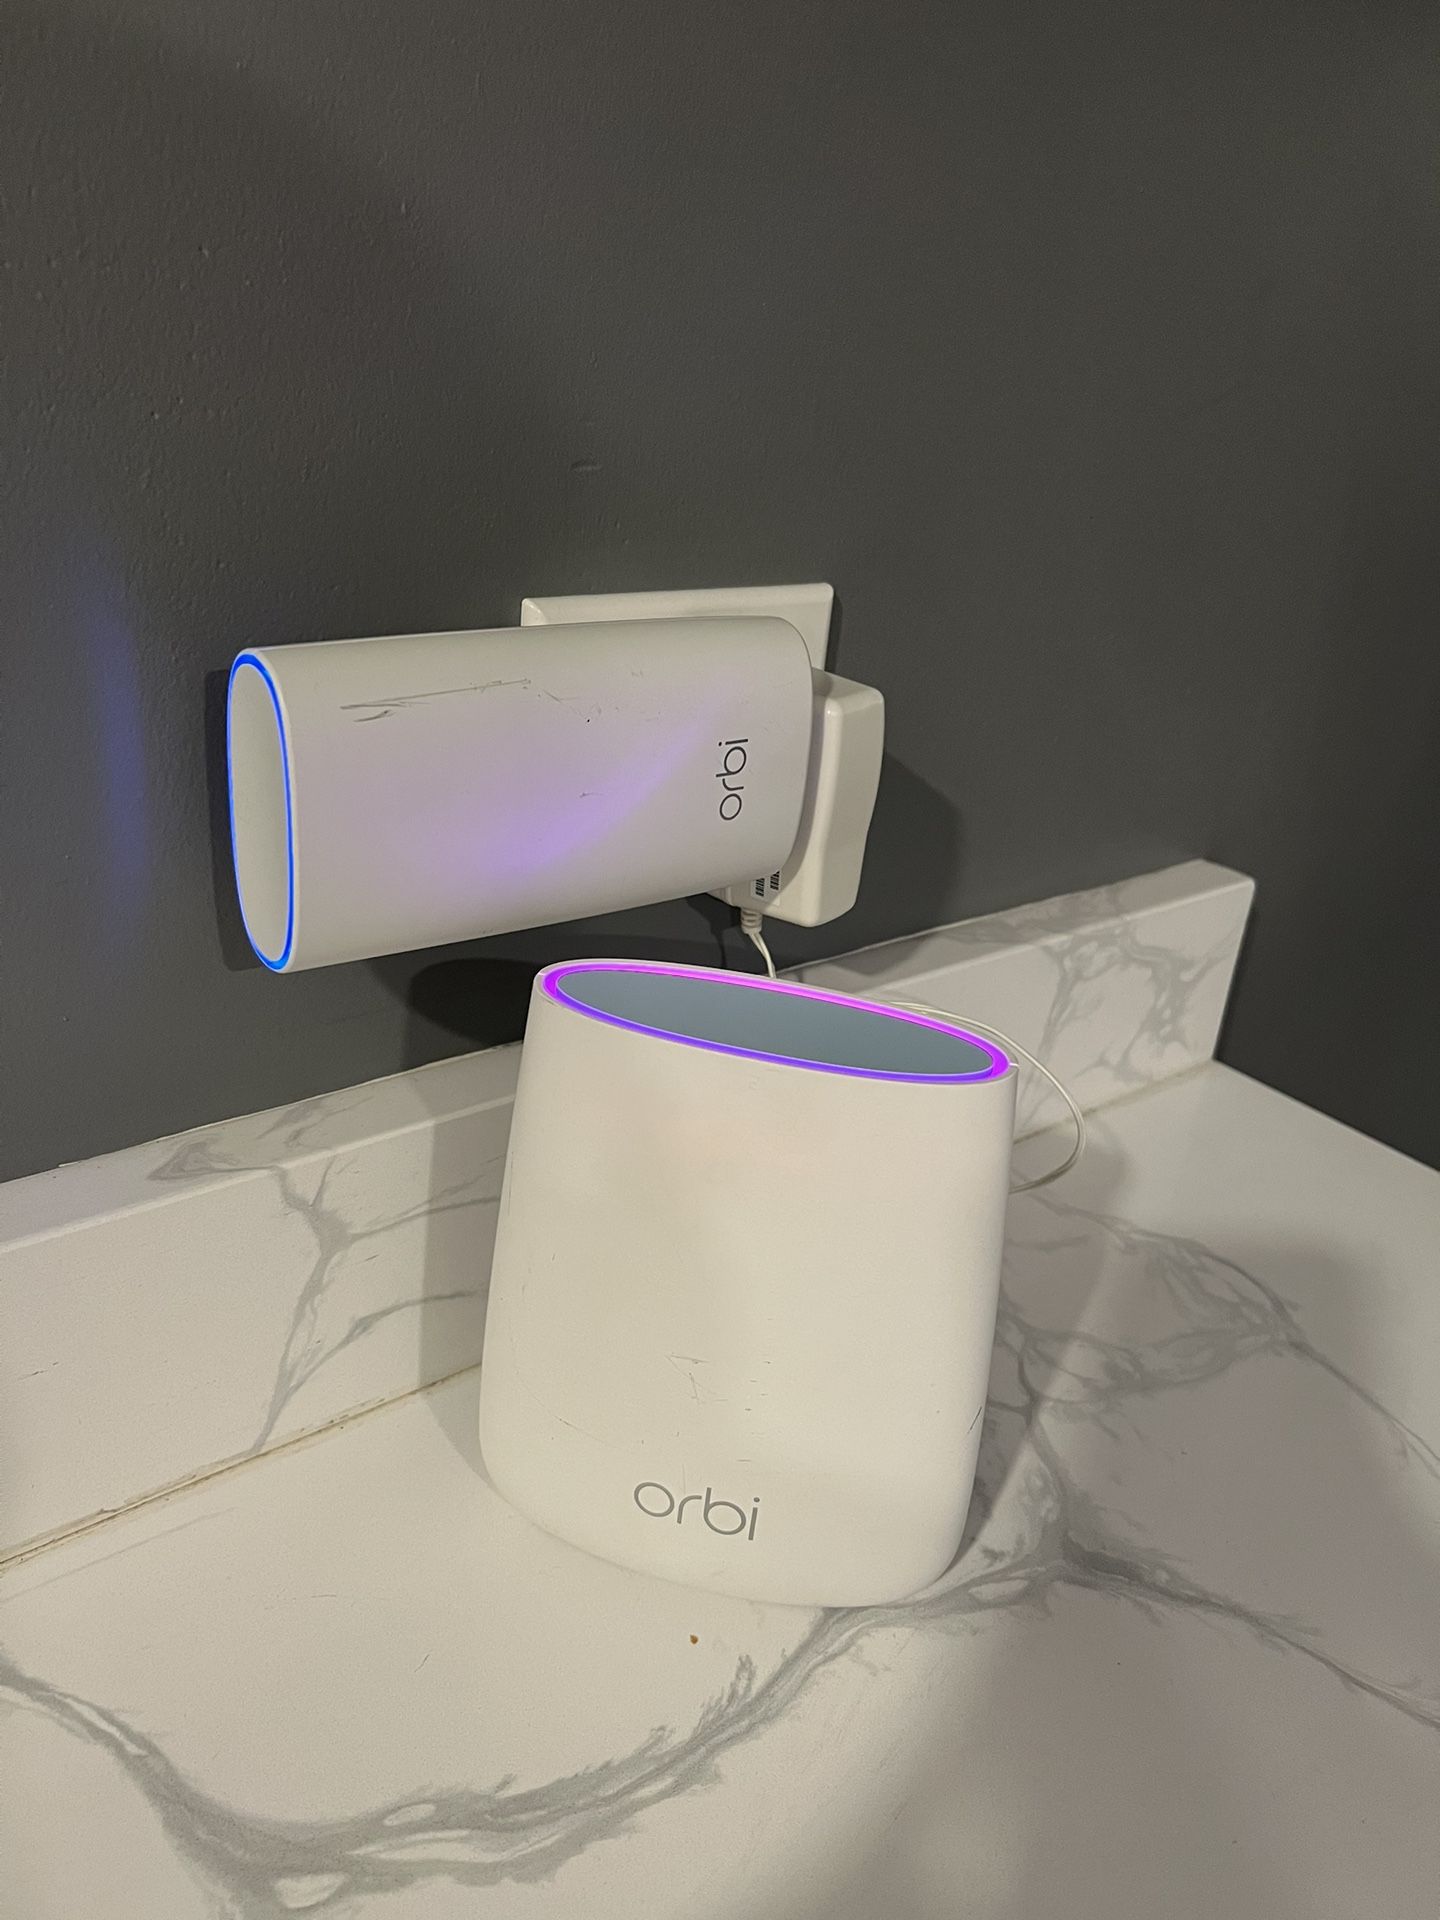 NETGEAR Orbi Compact Wall-Plug Whole Home Mesh WiFi System.Router and wall plug satellite extender.